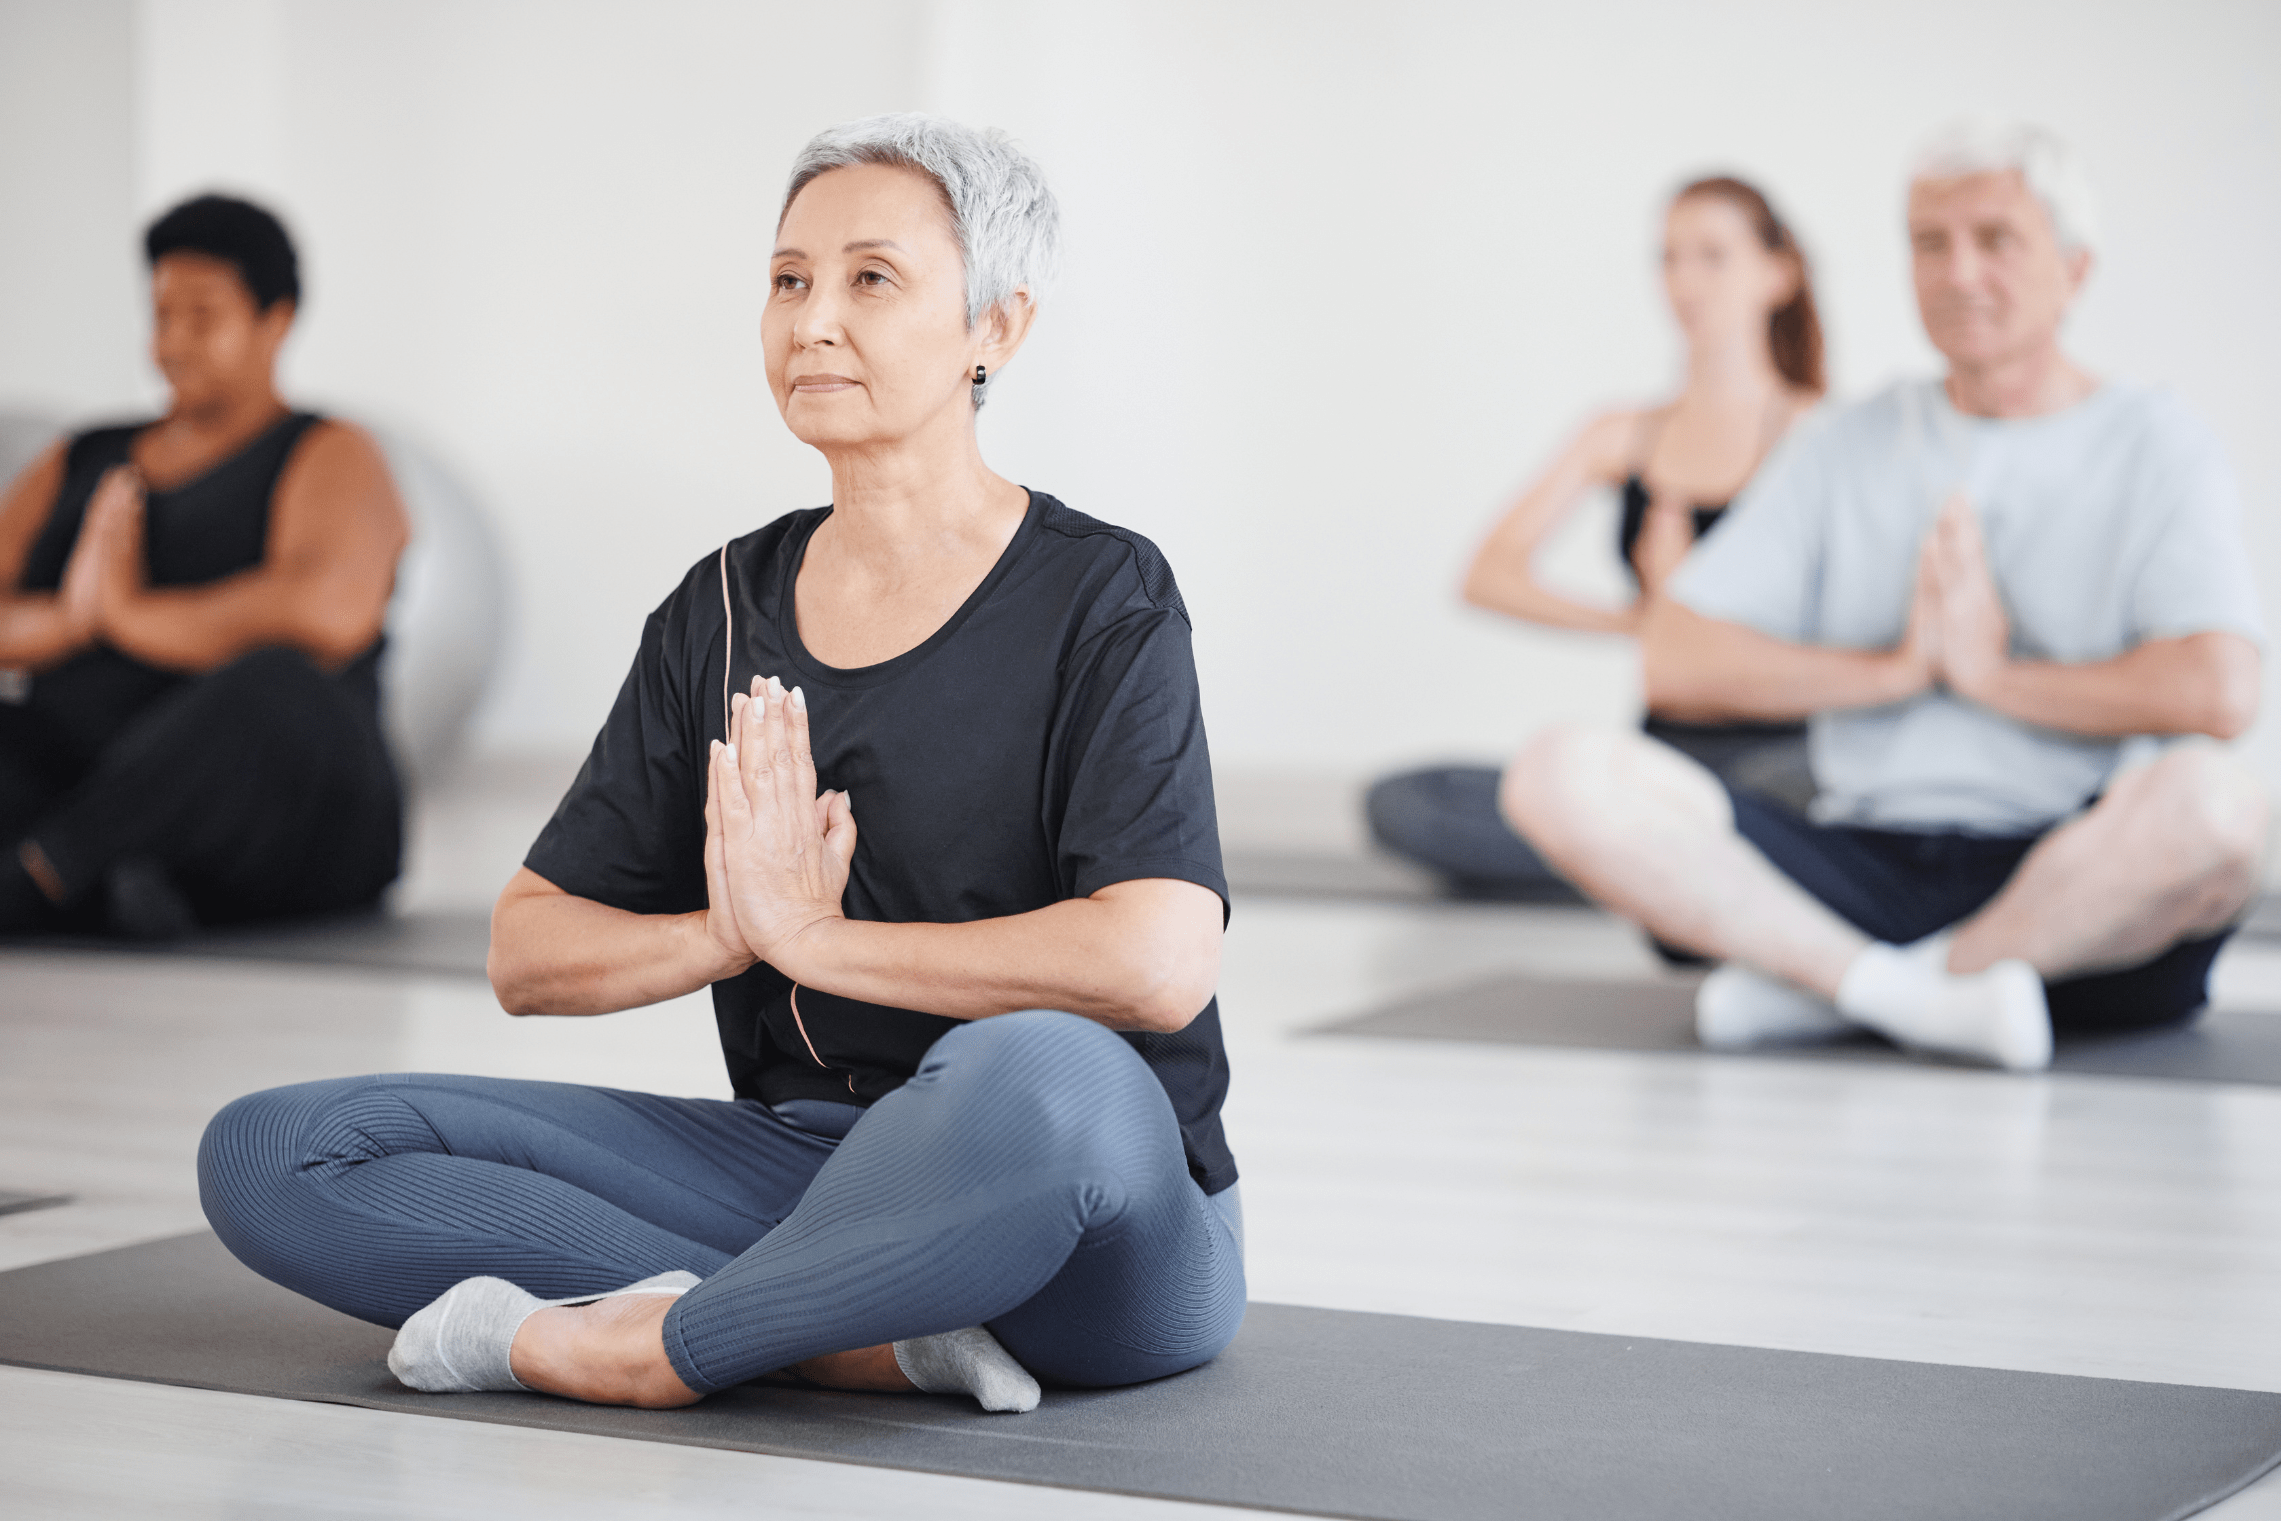 An image of a white haired woman sitting on a yoga mat in a class.